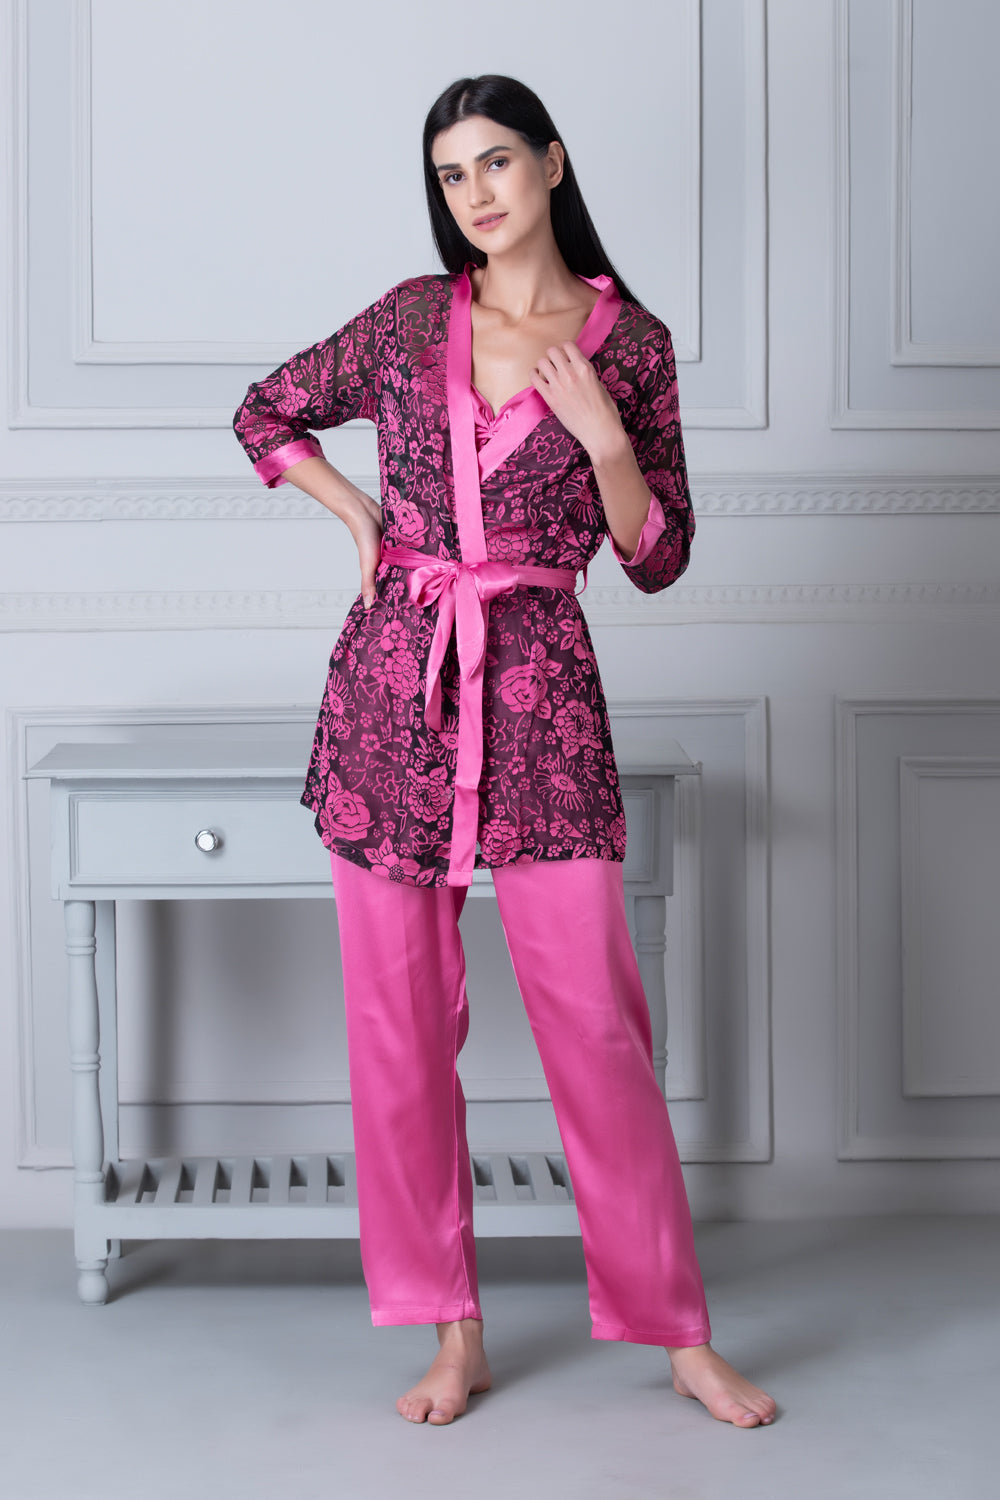 Satin Night suit with Floral Robe Private Lives